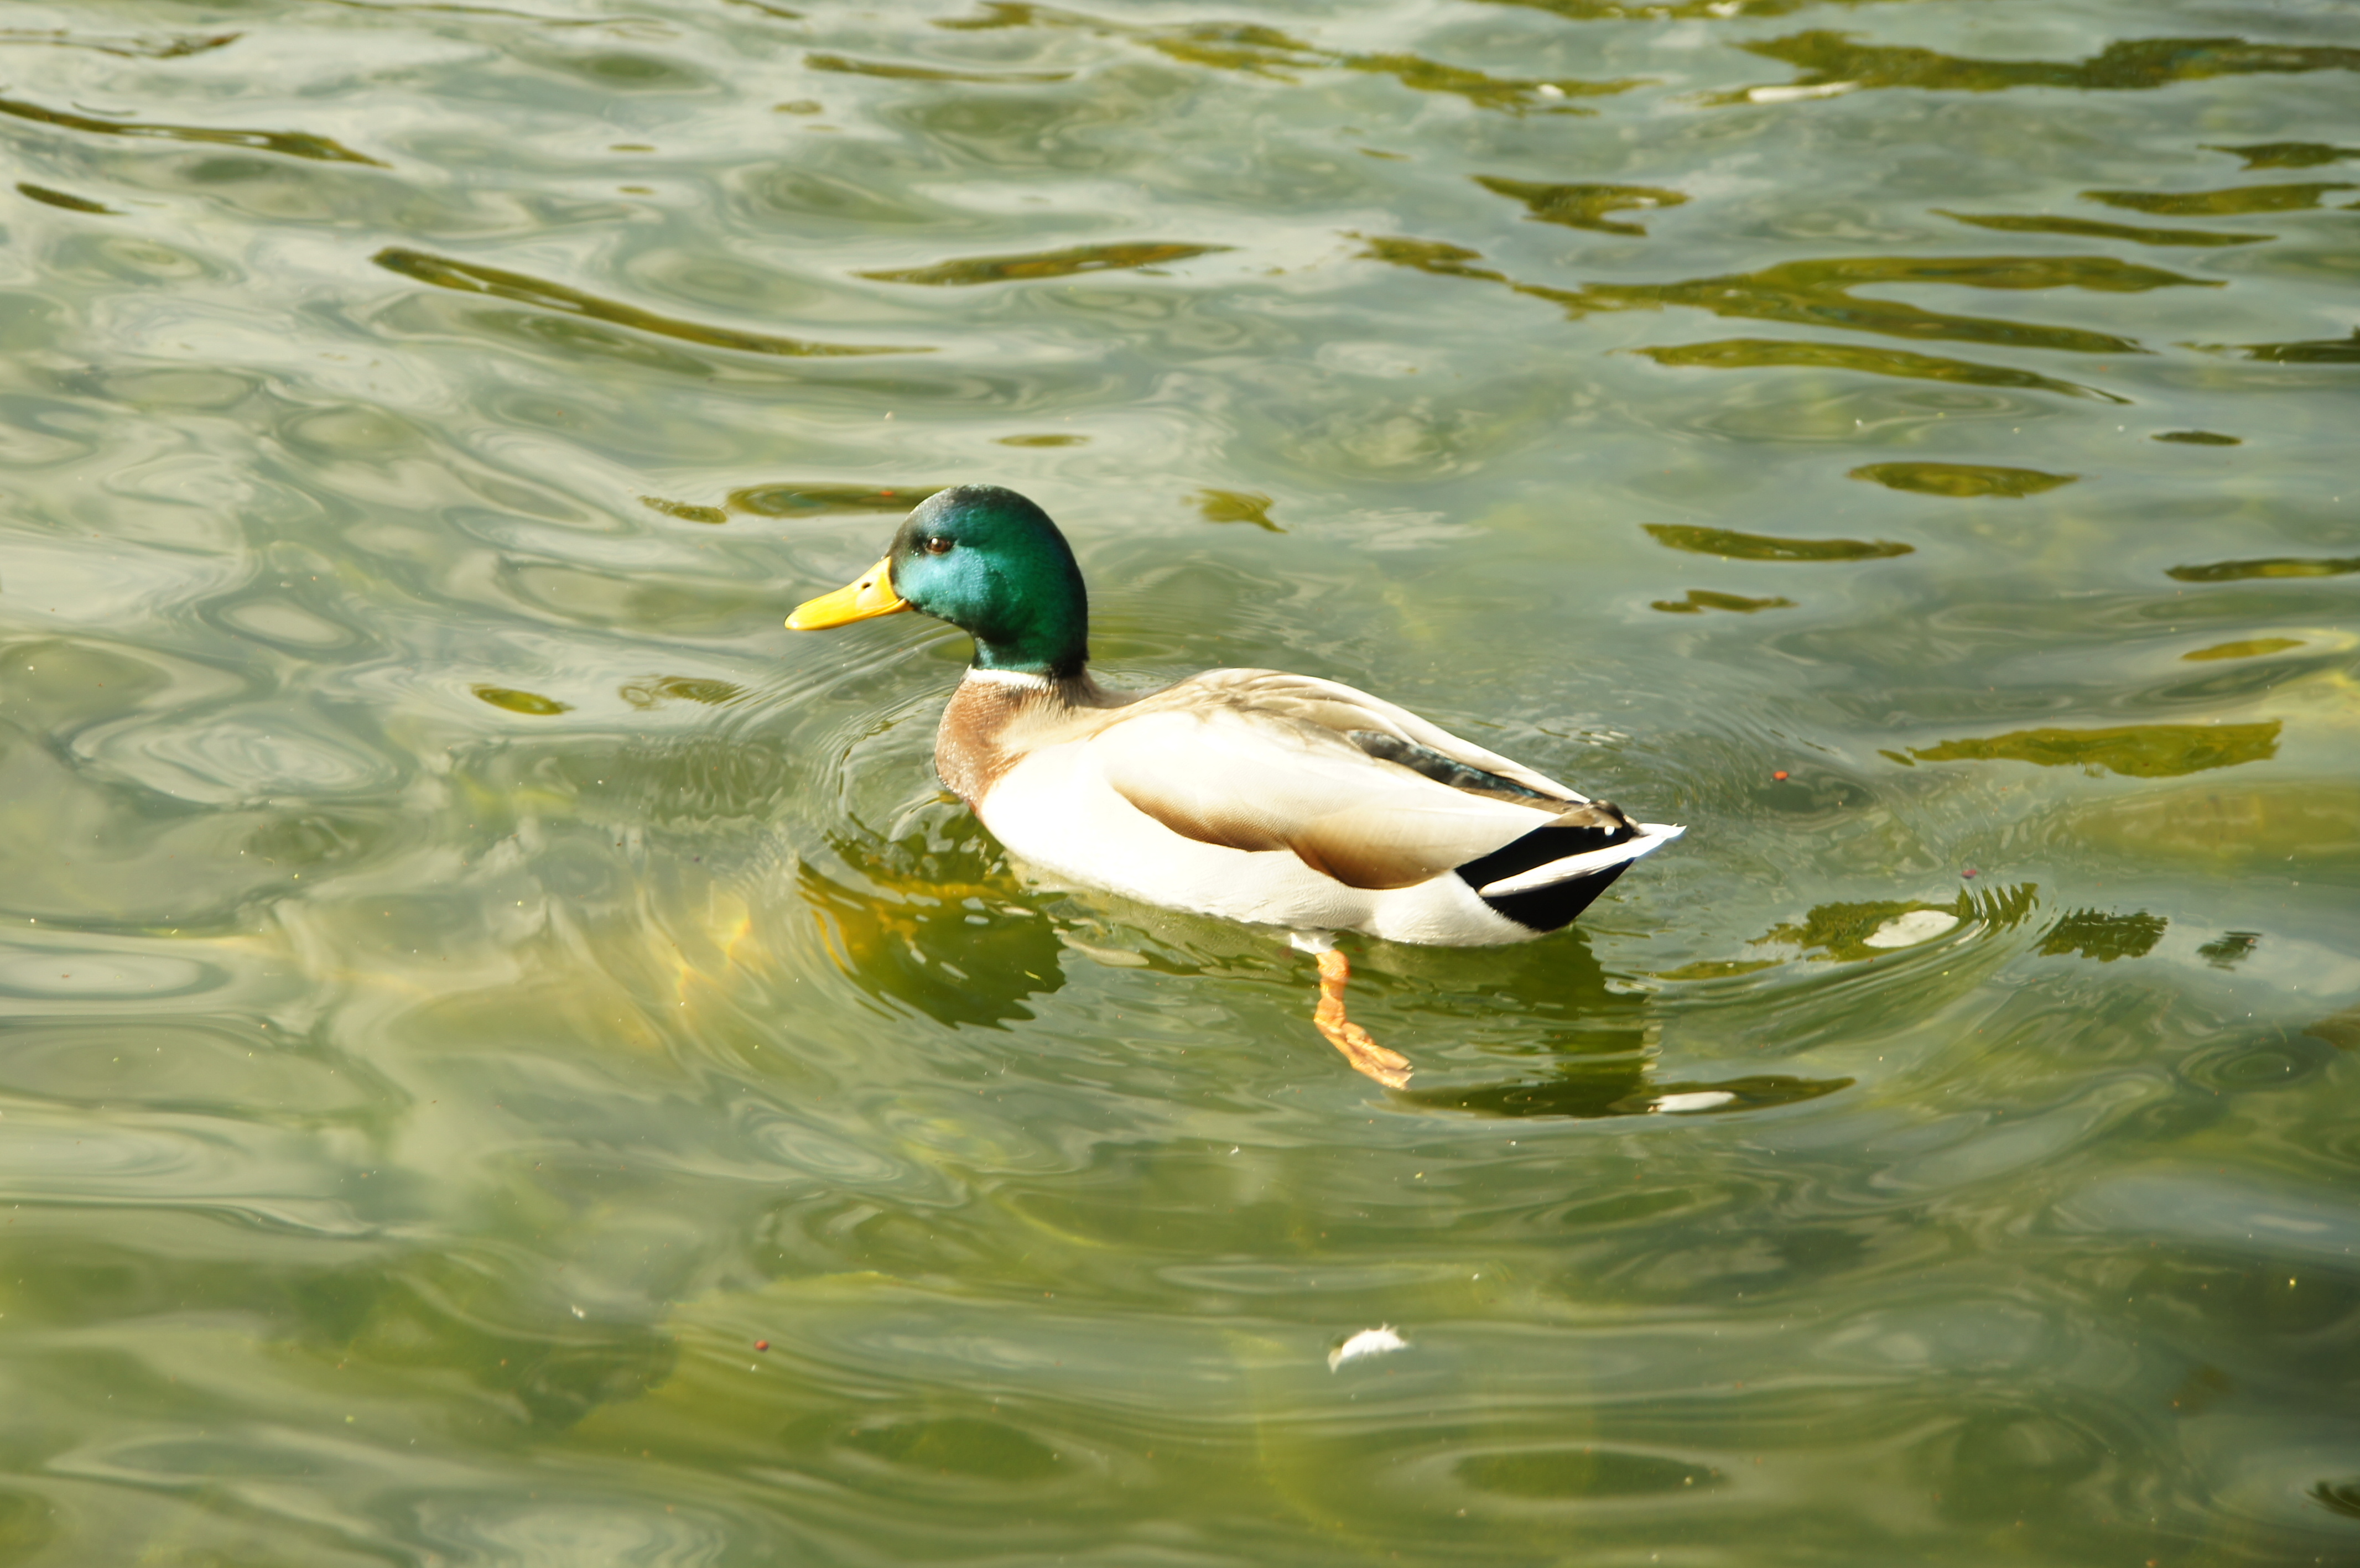 Duck in water - Our Great Photos